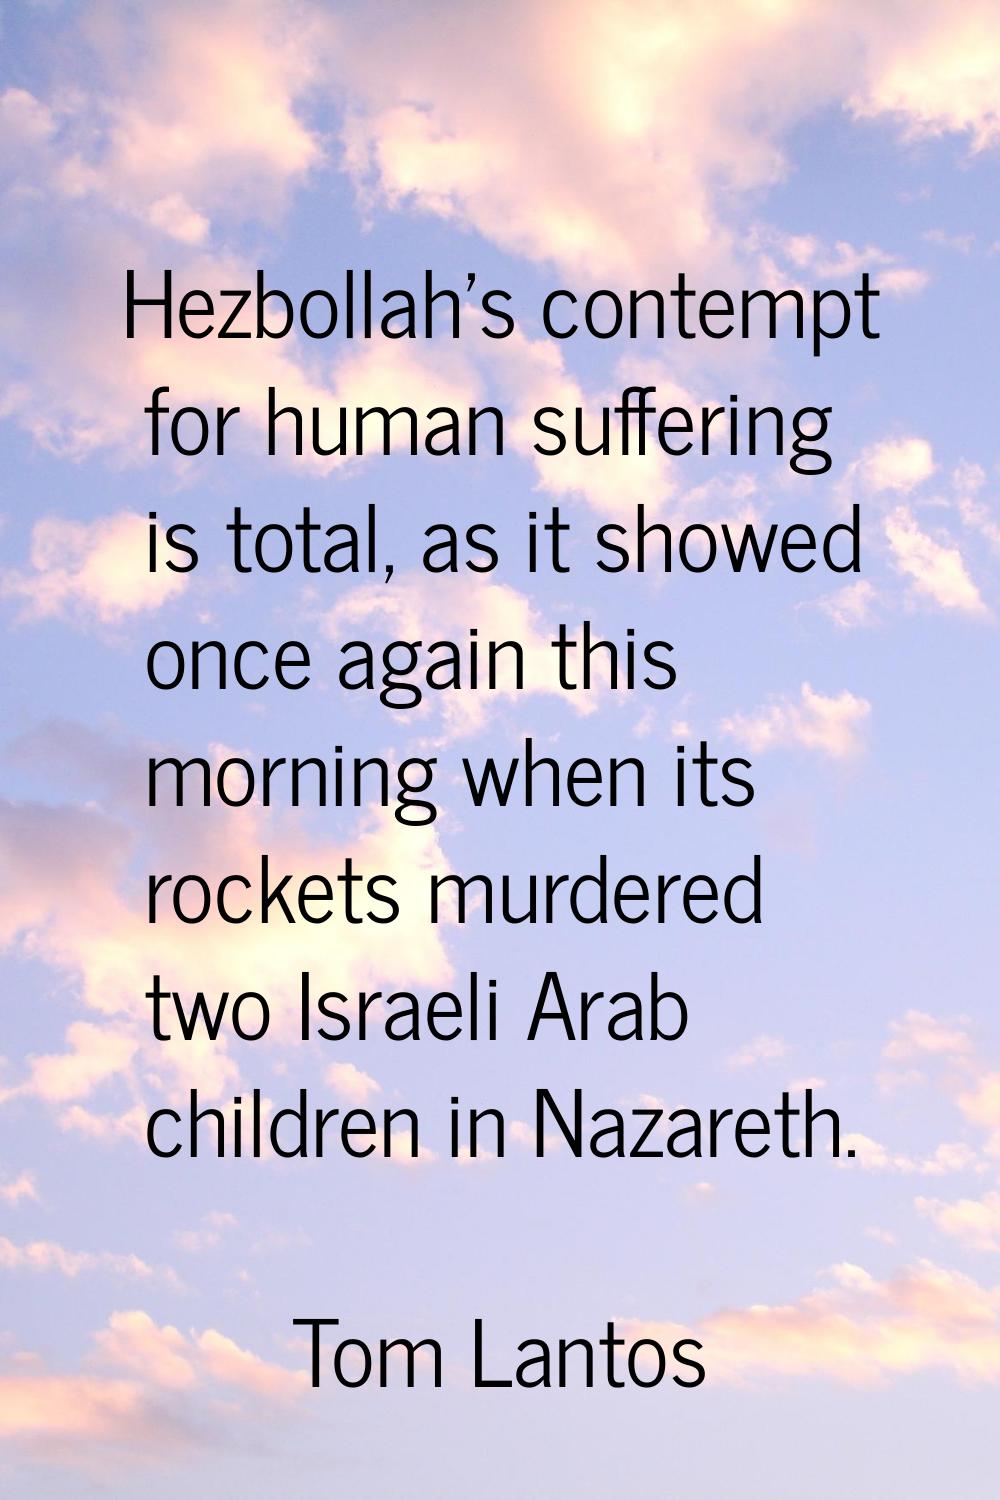 Hezbollah's contempt for human suffering is total, as it showed once again this morning when its ro